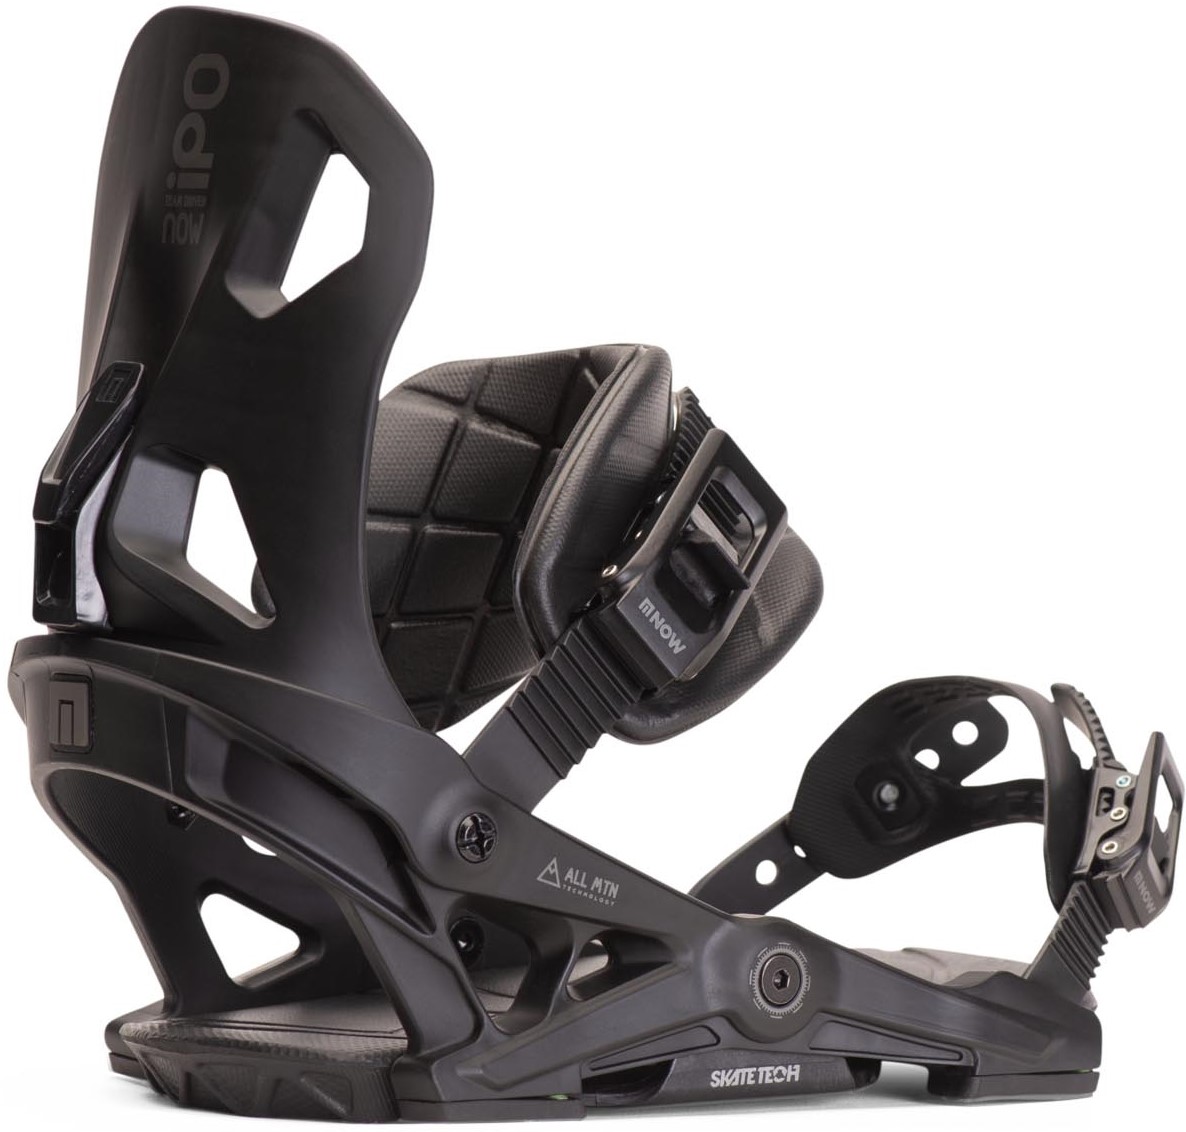 NOW IPO 2013-2020 Snowboard Binding Review - The Good Ride